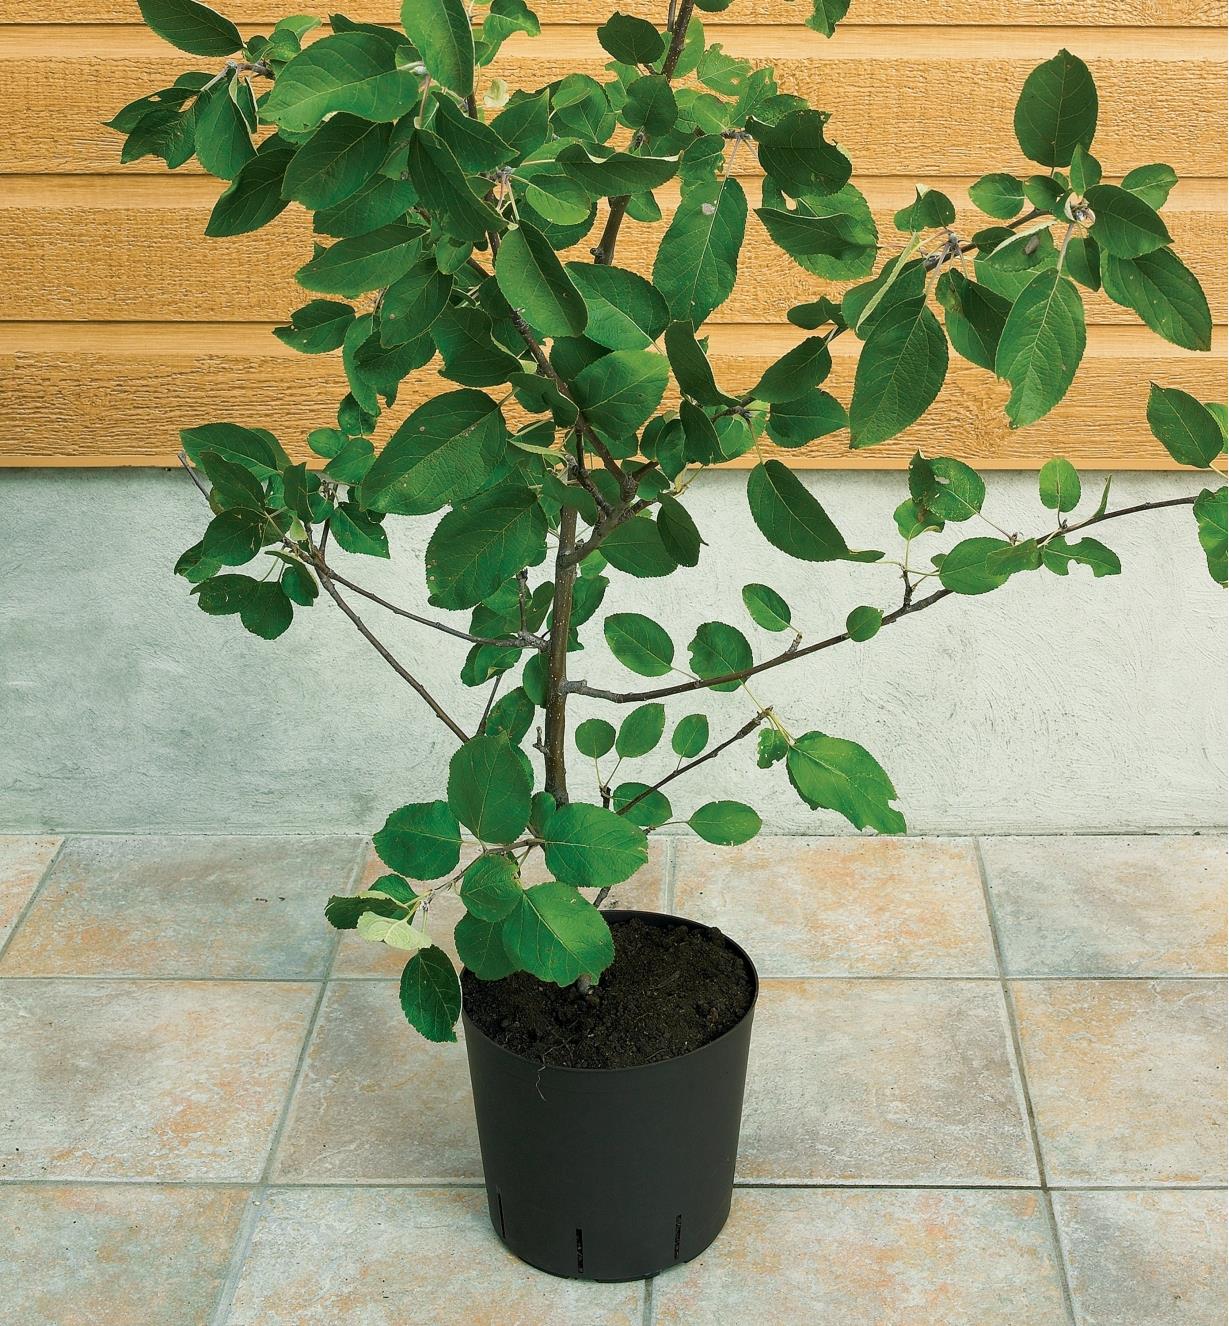 A tree branch transplanted into a pot